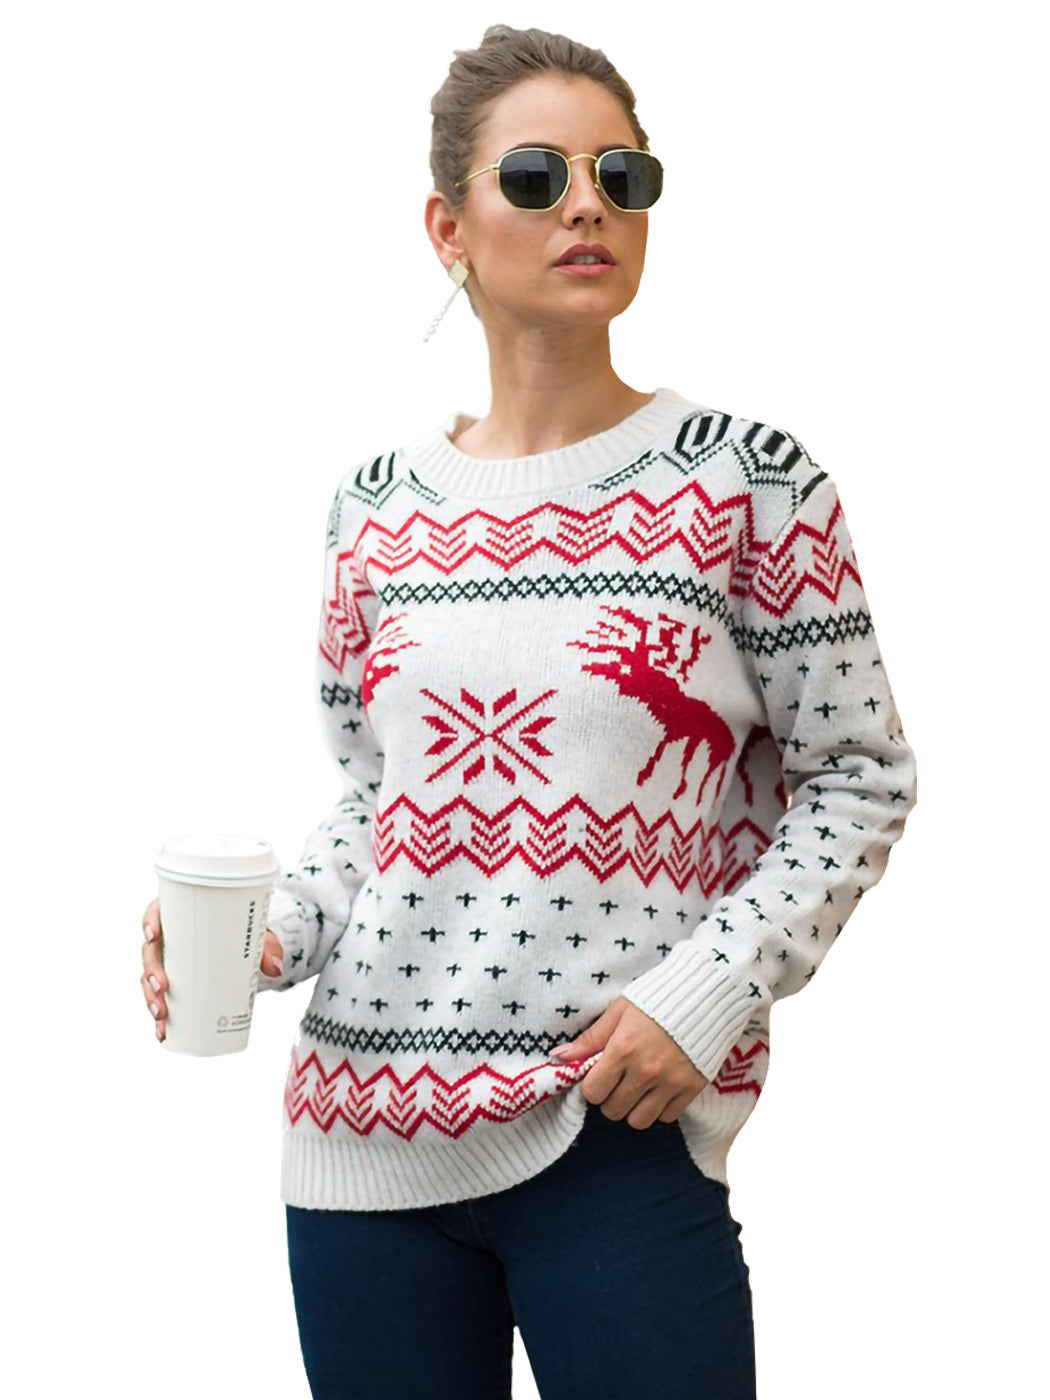 Christmas Sweater Long Sleeve Reindeer Snowflakes Patterns Knit Pullover Tops